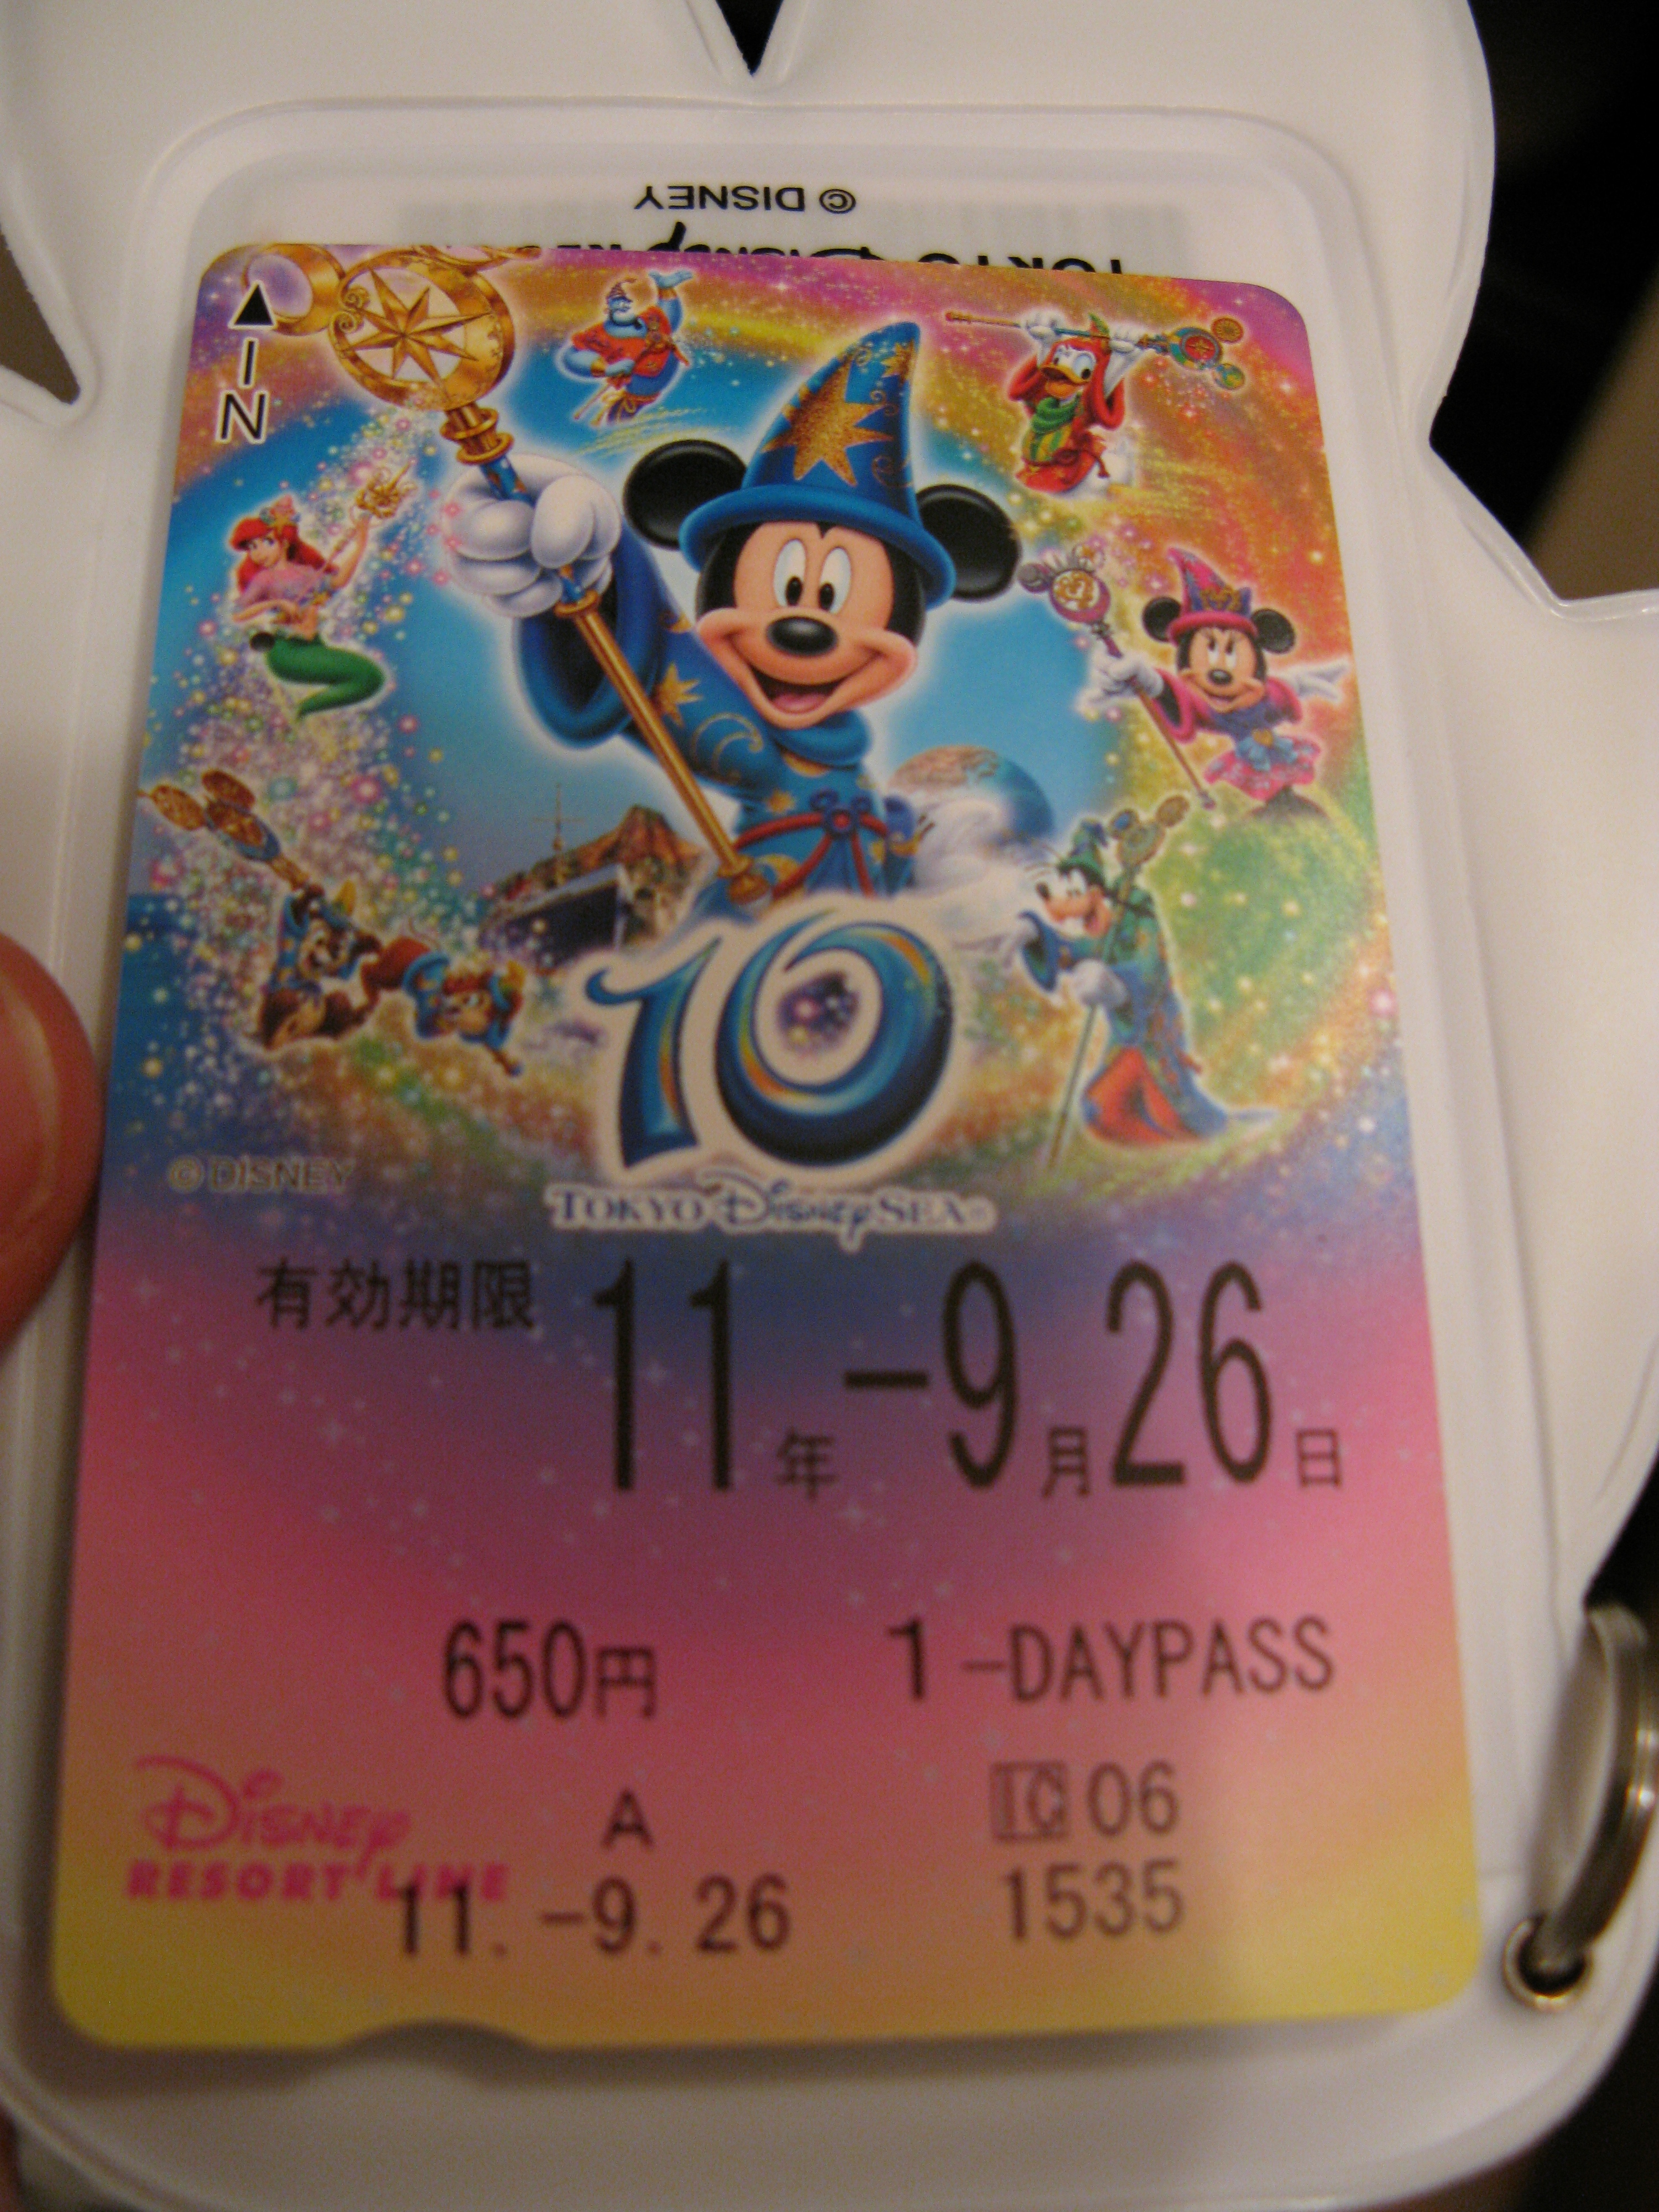 One day-pass for the Disney monor